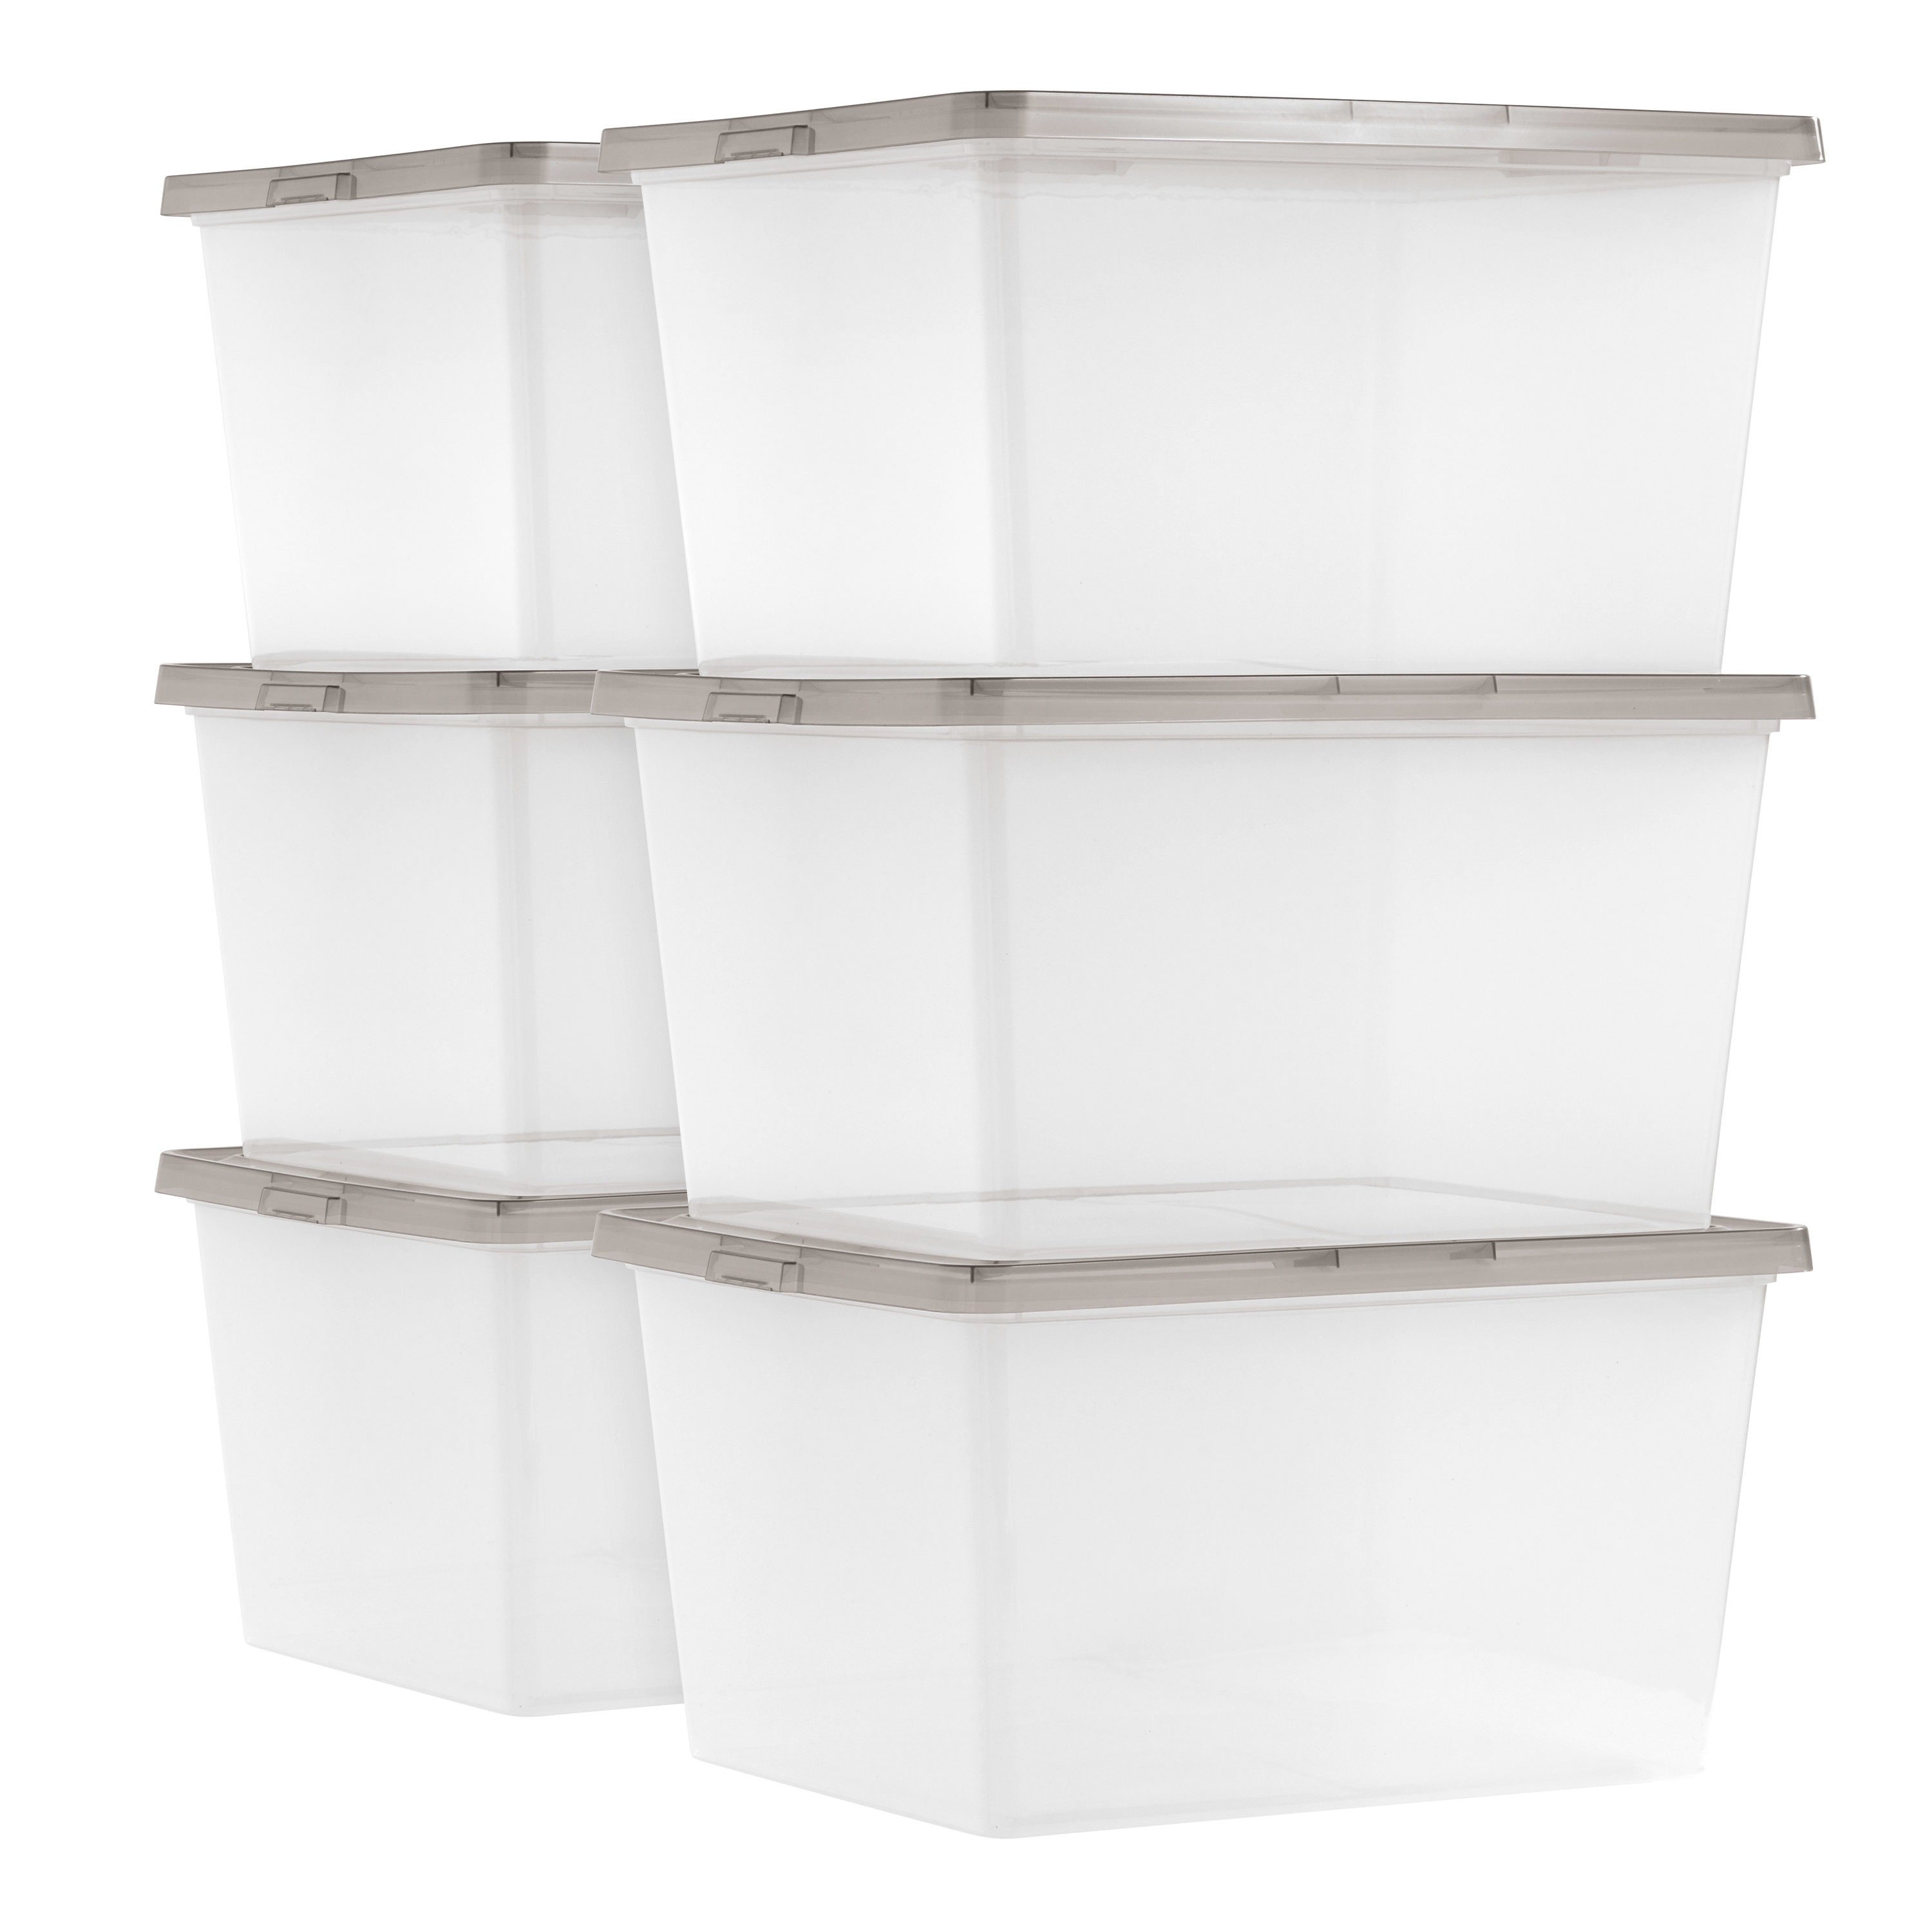  IRIS USA 4 Pack 24.5qt Plastic Storage Bin Tote Organizing  Container with Latching Lid,Clear